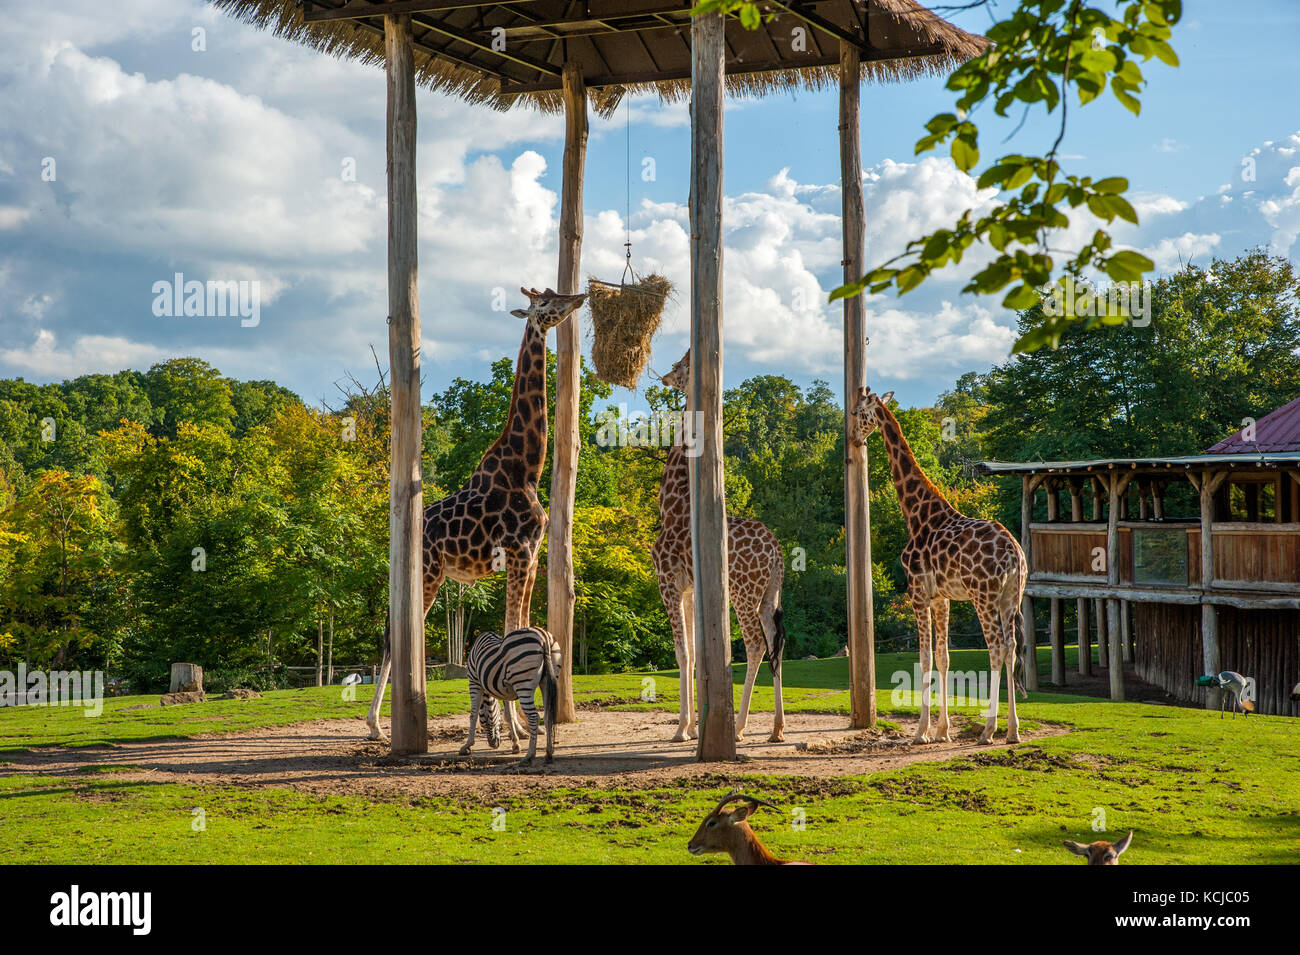 Giraffes eating straw during feeding time in zoo Stock Photo